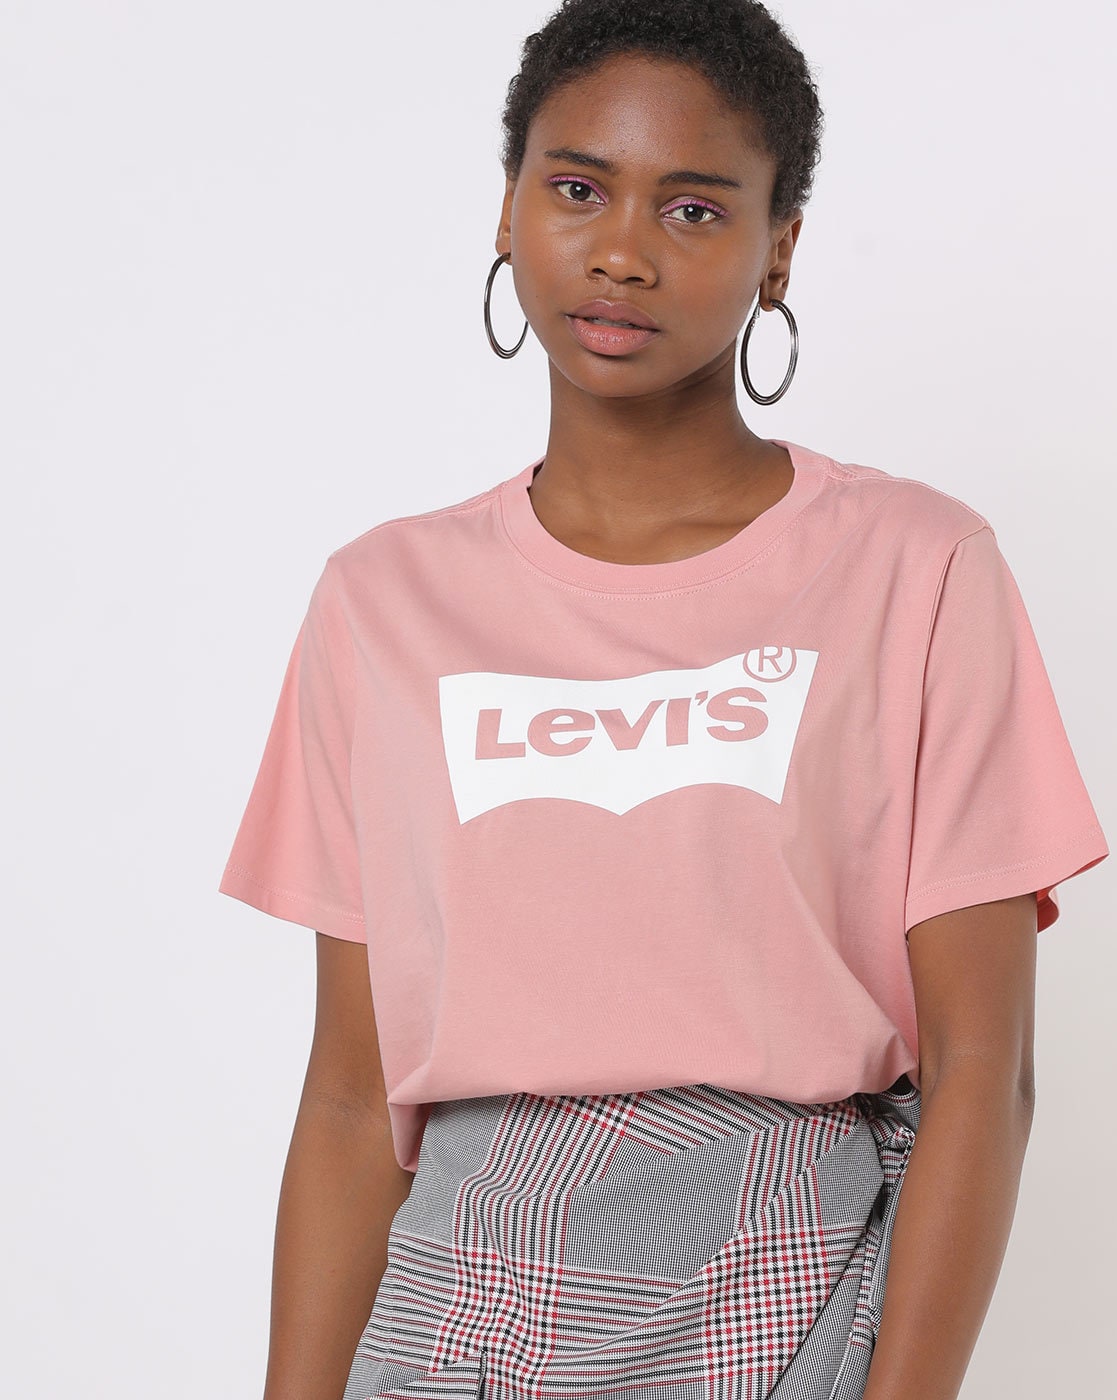 levis t shirt for girl